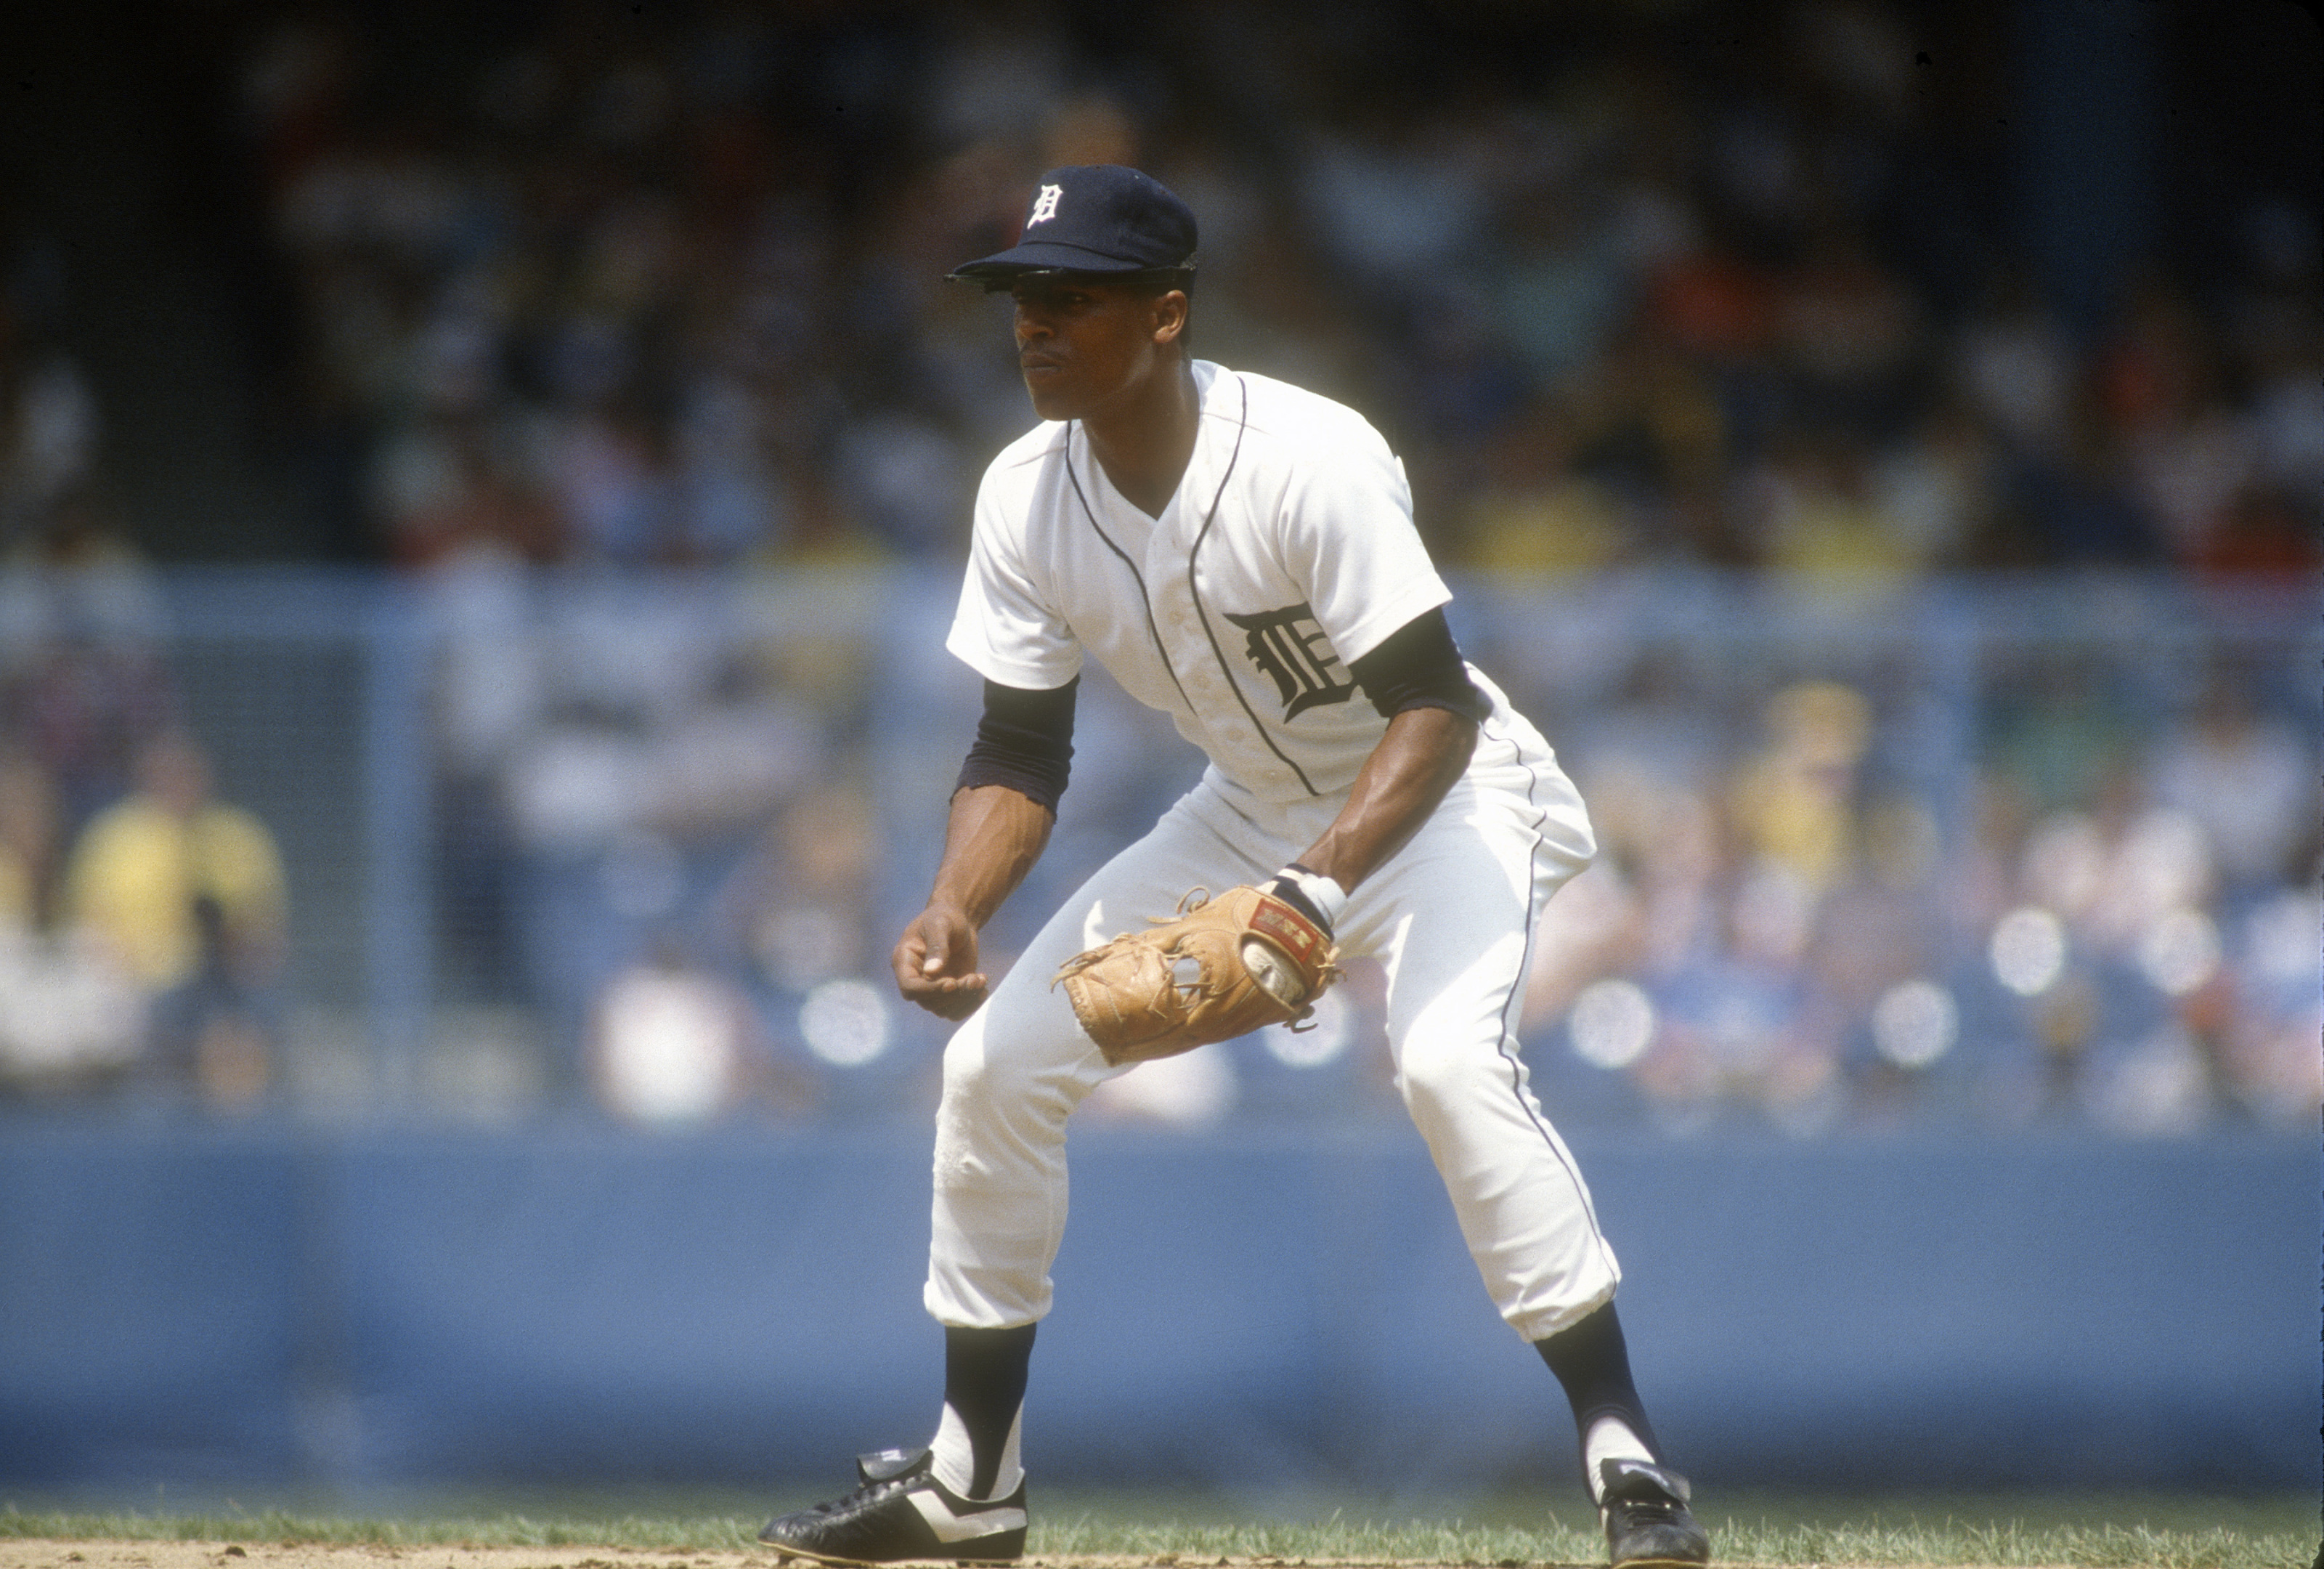 Detroit Tigers finally announce date for Lou Whitaker's no. 1